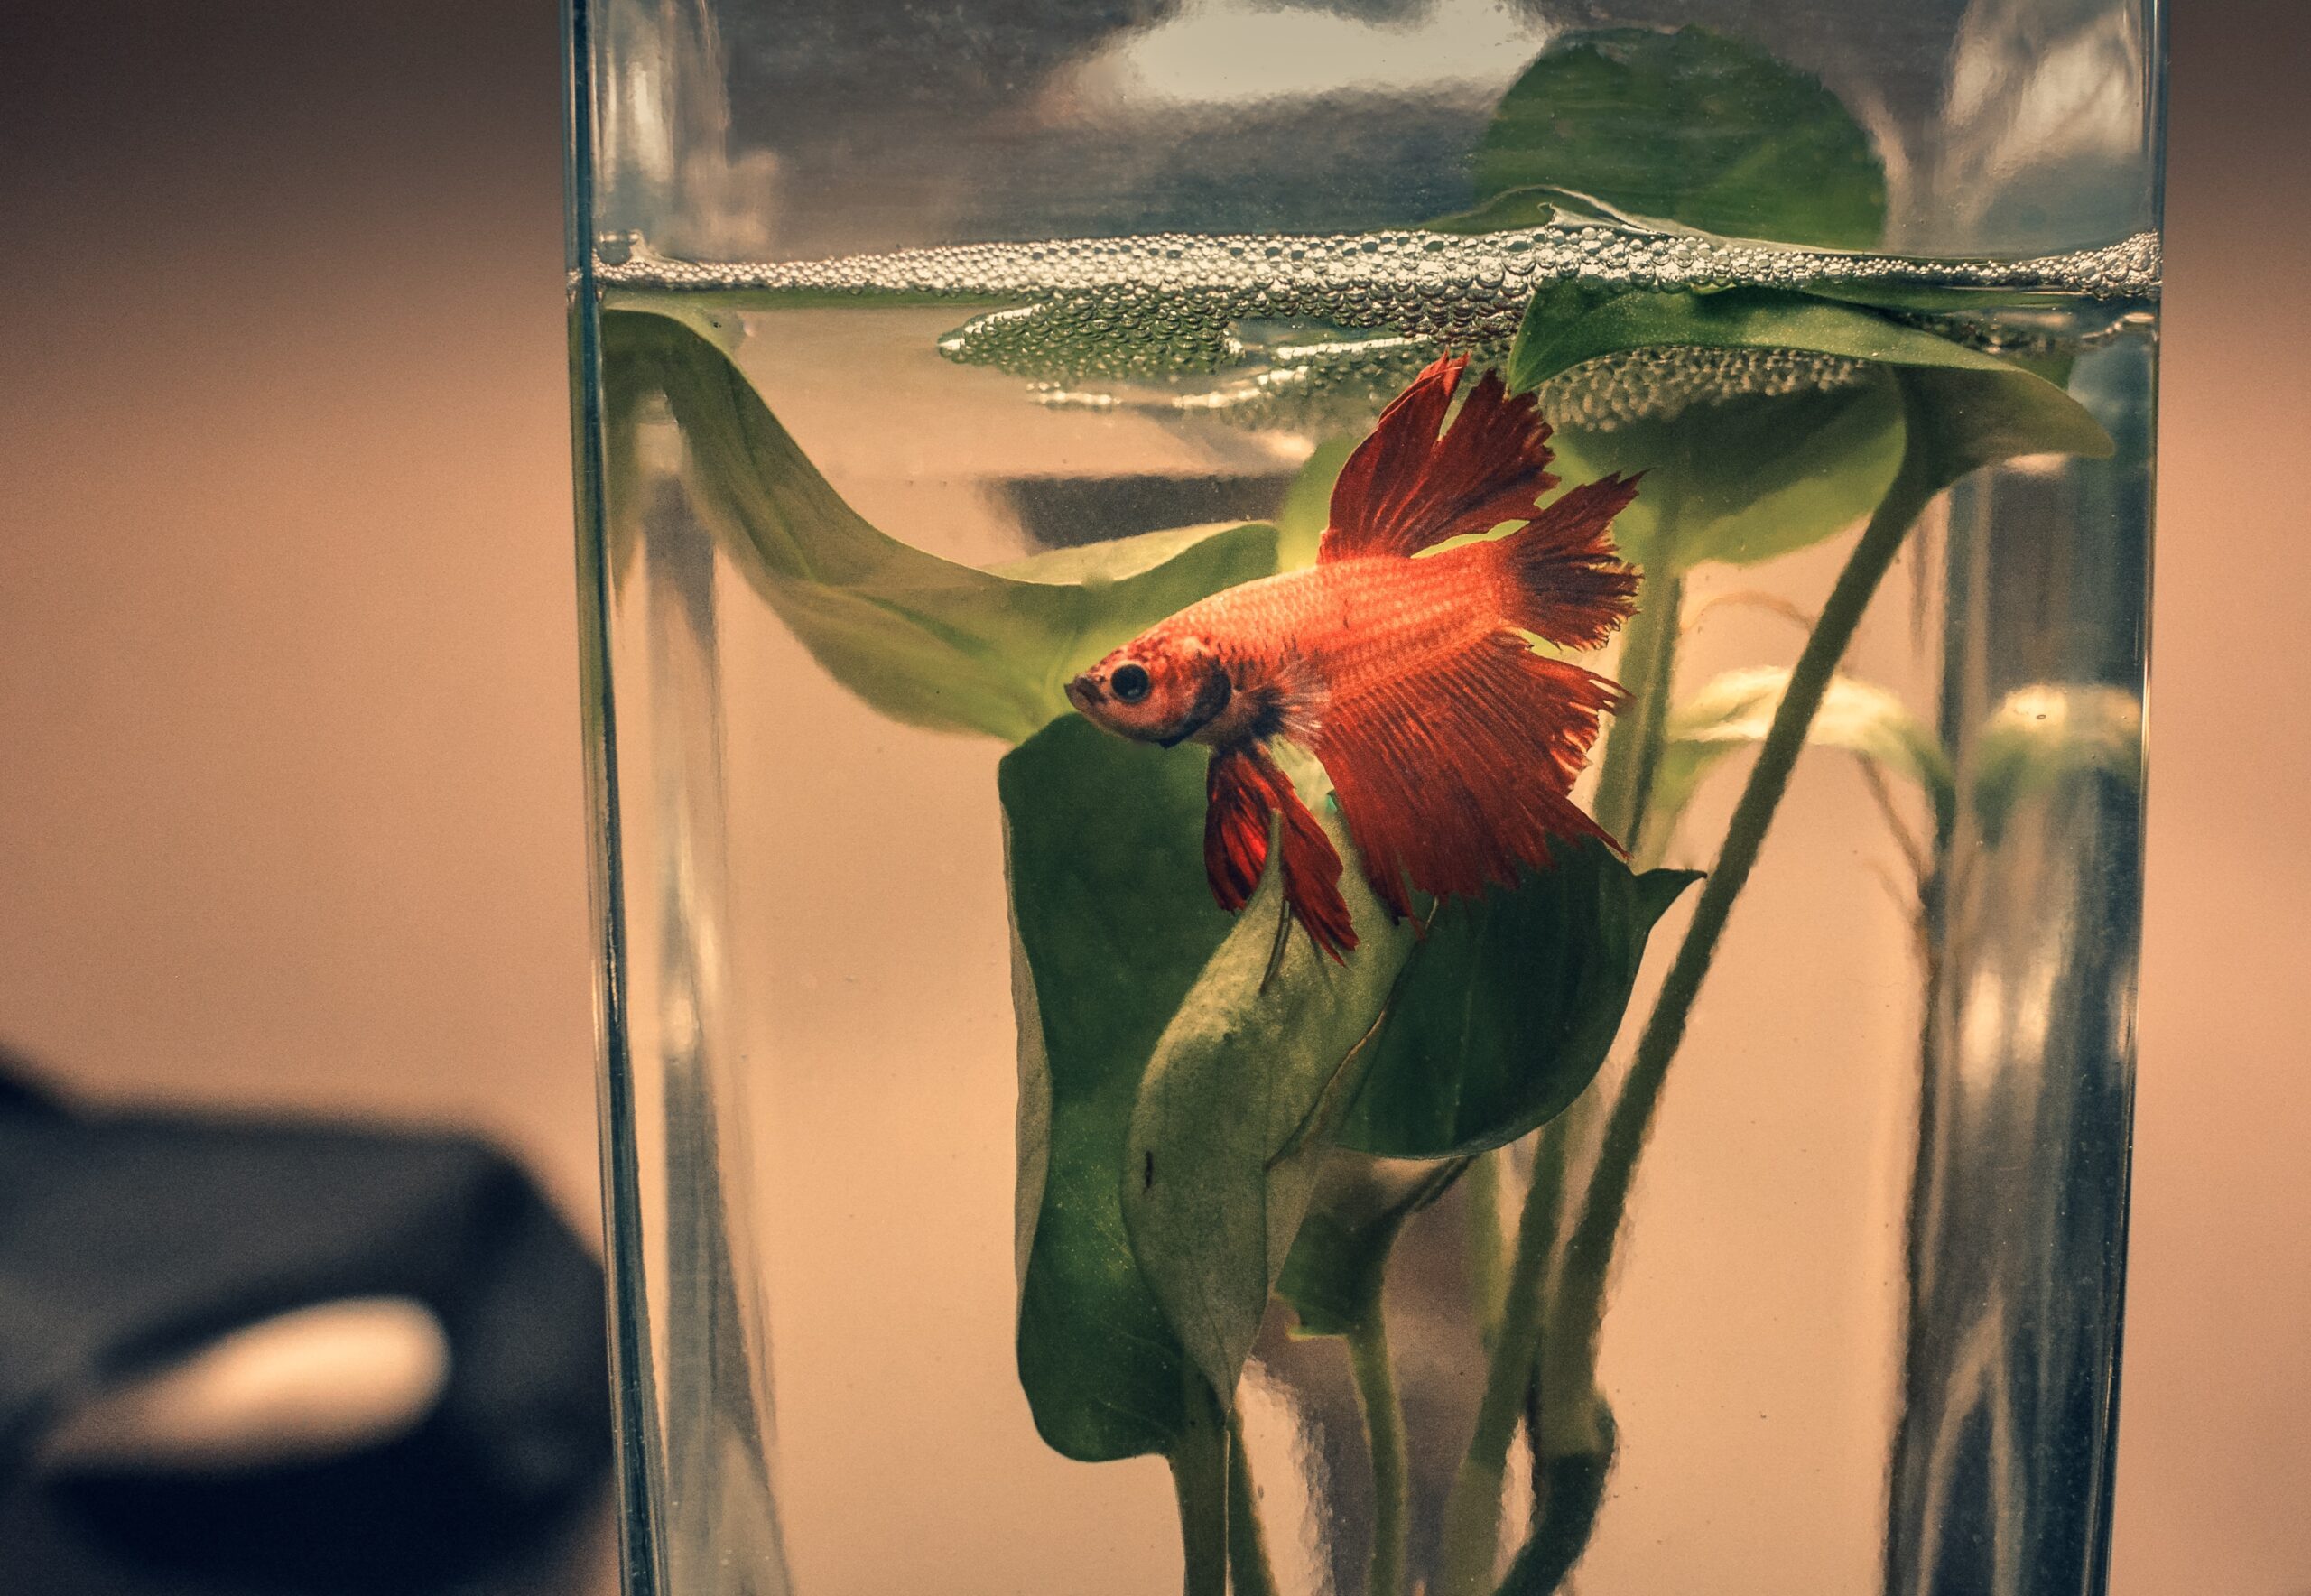 Fish Tank Wisdom: The Healing Power of Forgiveness - Busted Halo